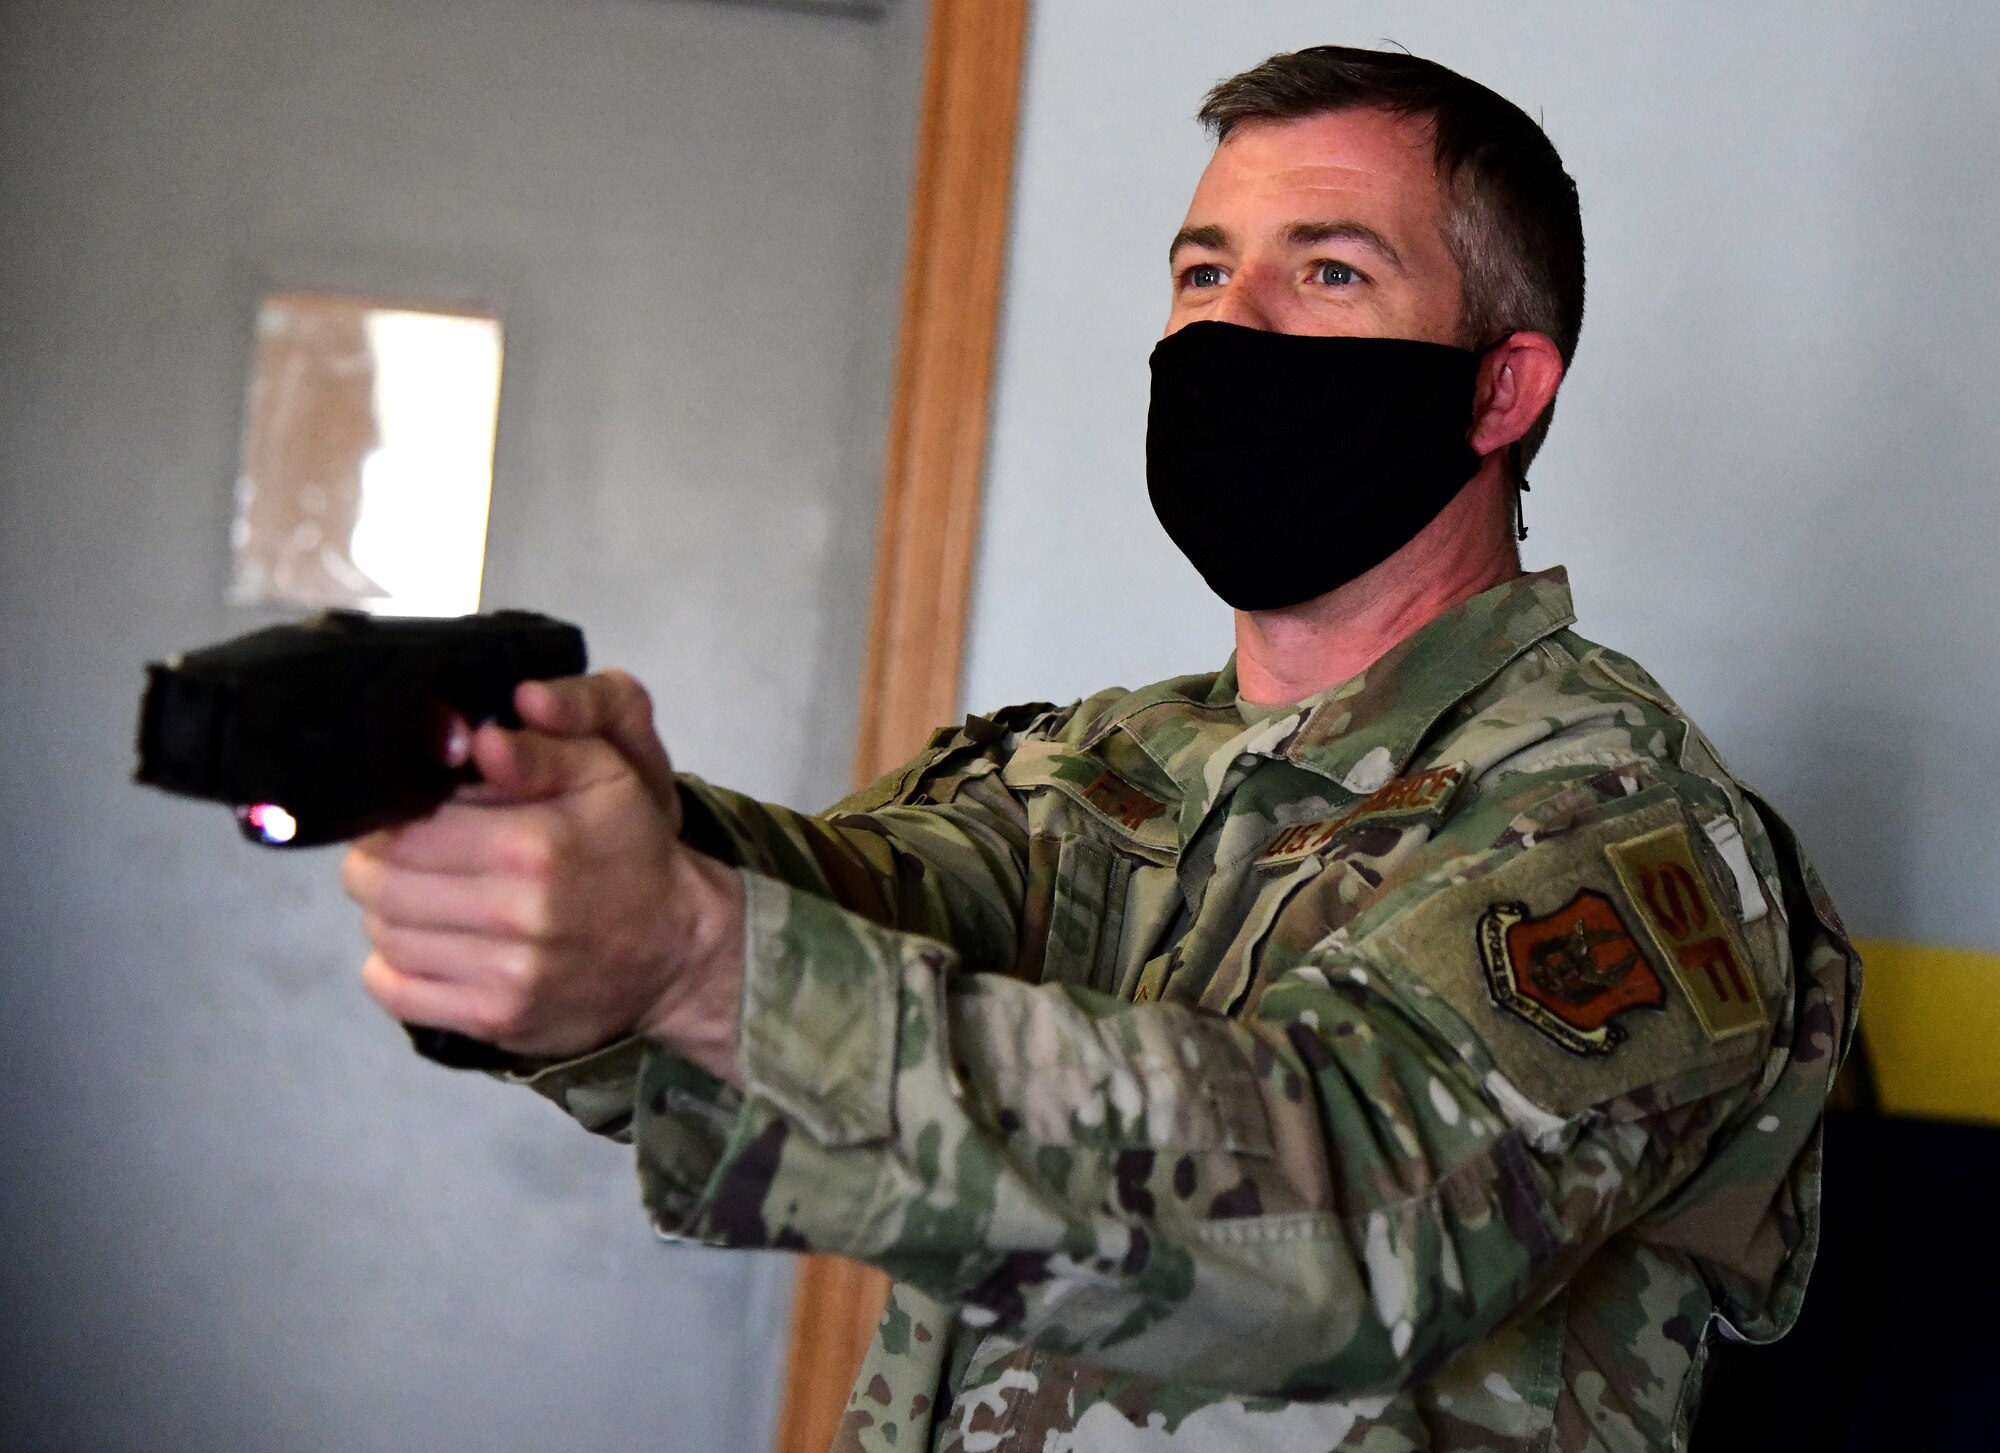 926th Security Forces Squadron practices Taser drills during their Leader Led Training Course, April 10, 2021, at Nellis Air Force Base, Nevada.